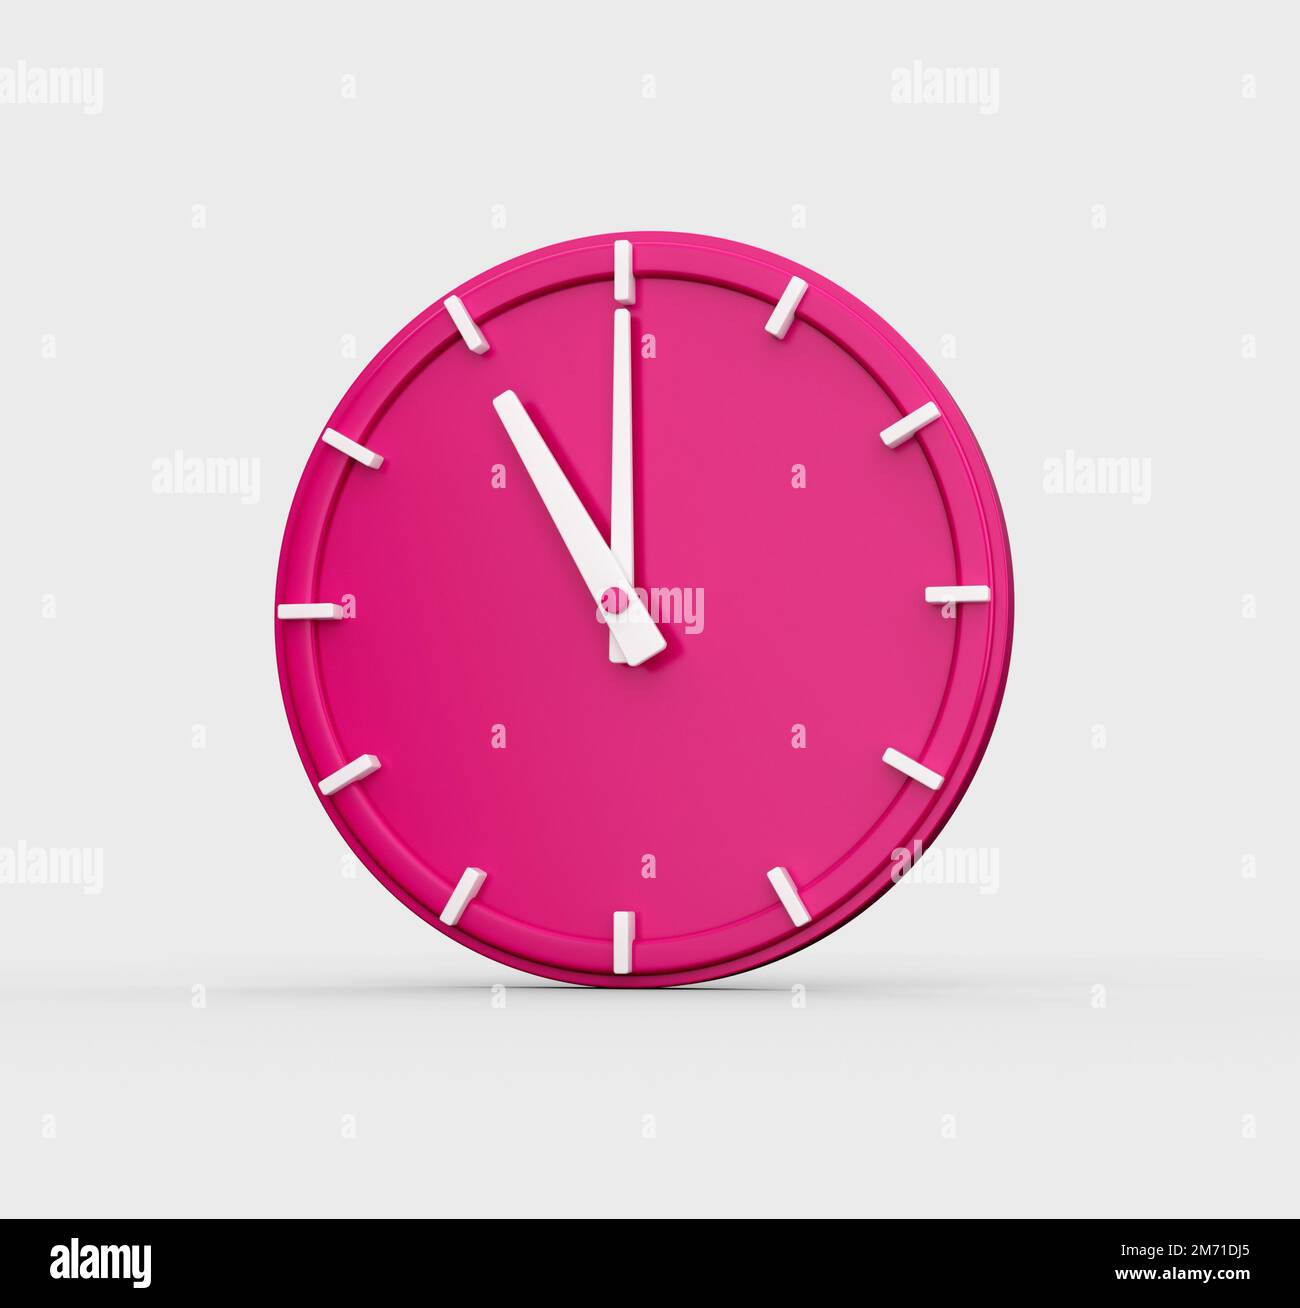 A 3D render of a pink wall clock showing the time 11 o'clock isolated on a white background Stock Photo